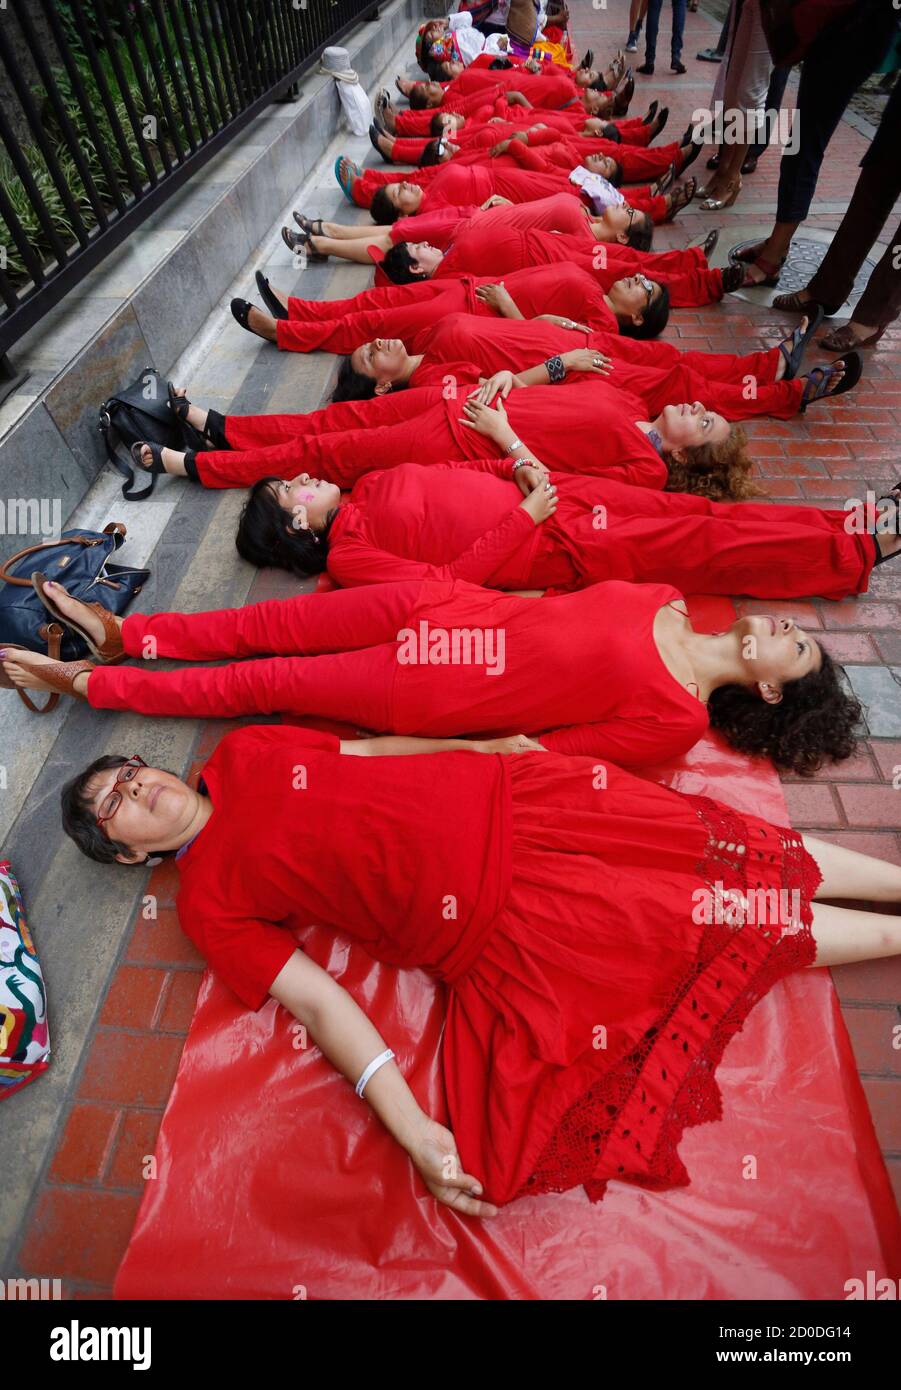 Activists dressed in red protest in front of the Ministry of Women,  representing a human "red carpet" to symbolize women's rights being  trampled by the government, during International Women's Day in Lima